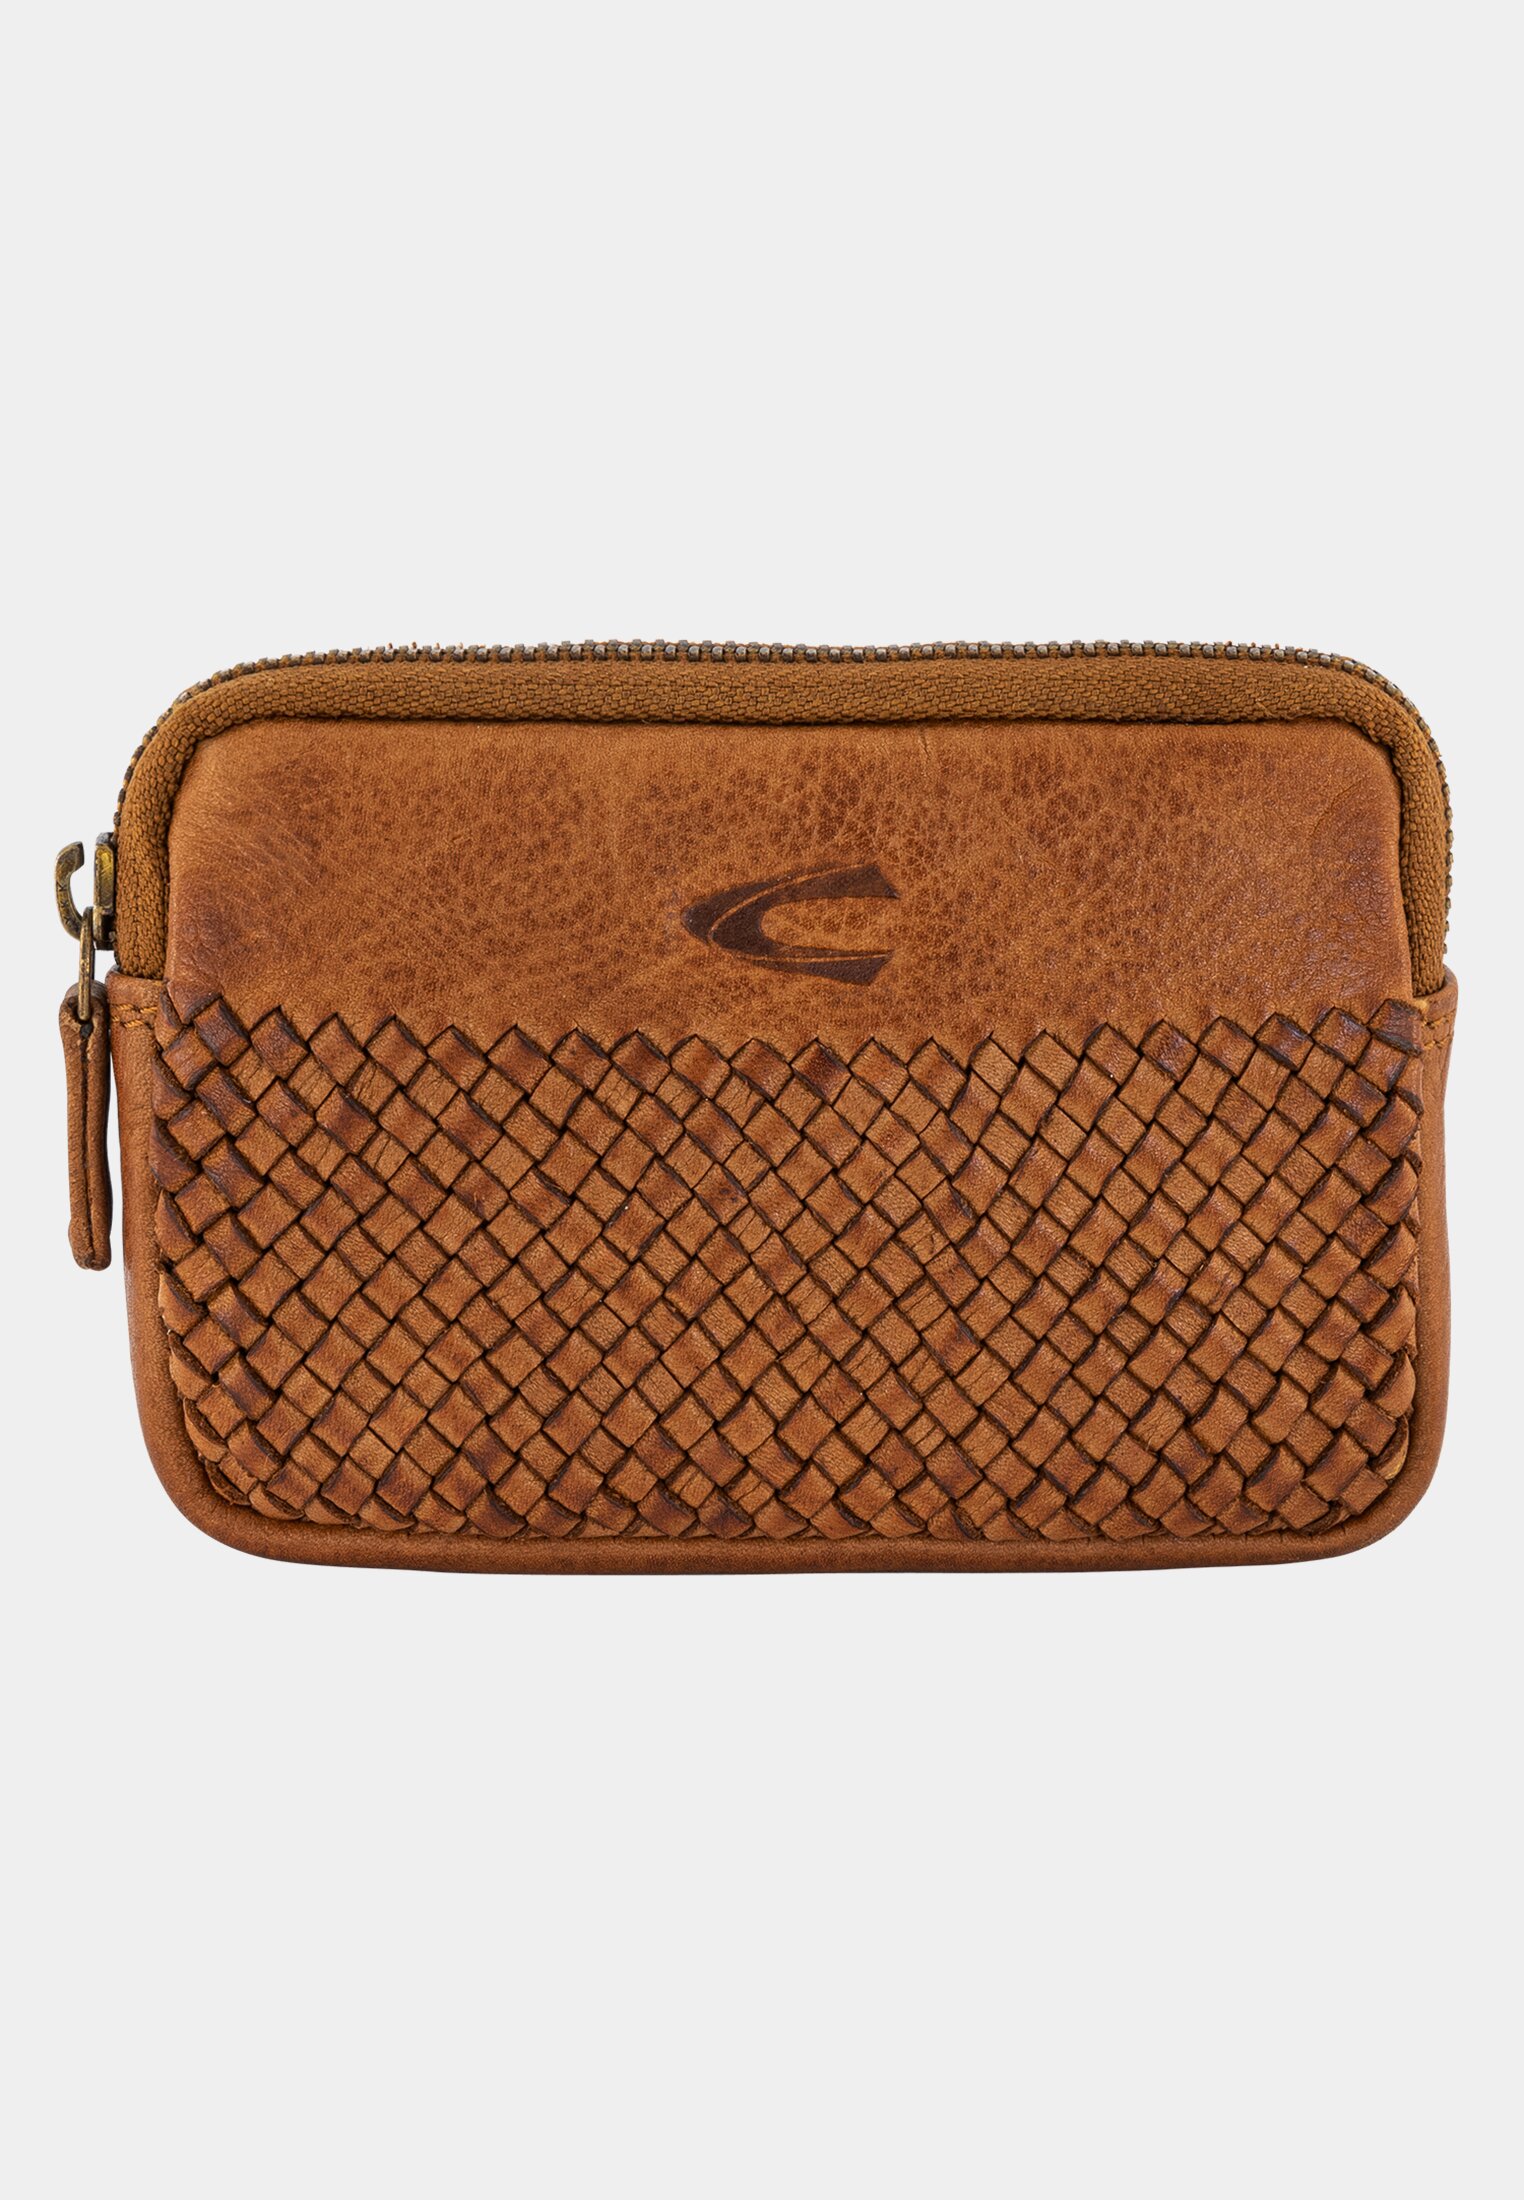 Camel Active Key case with authentic braided structure